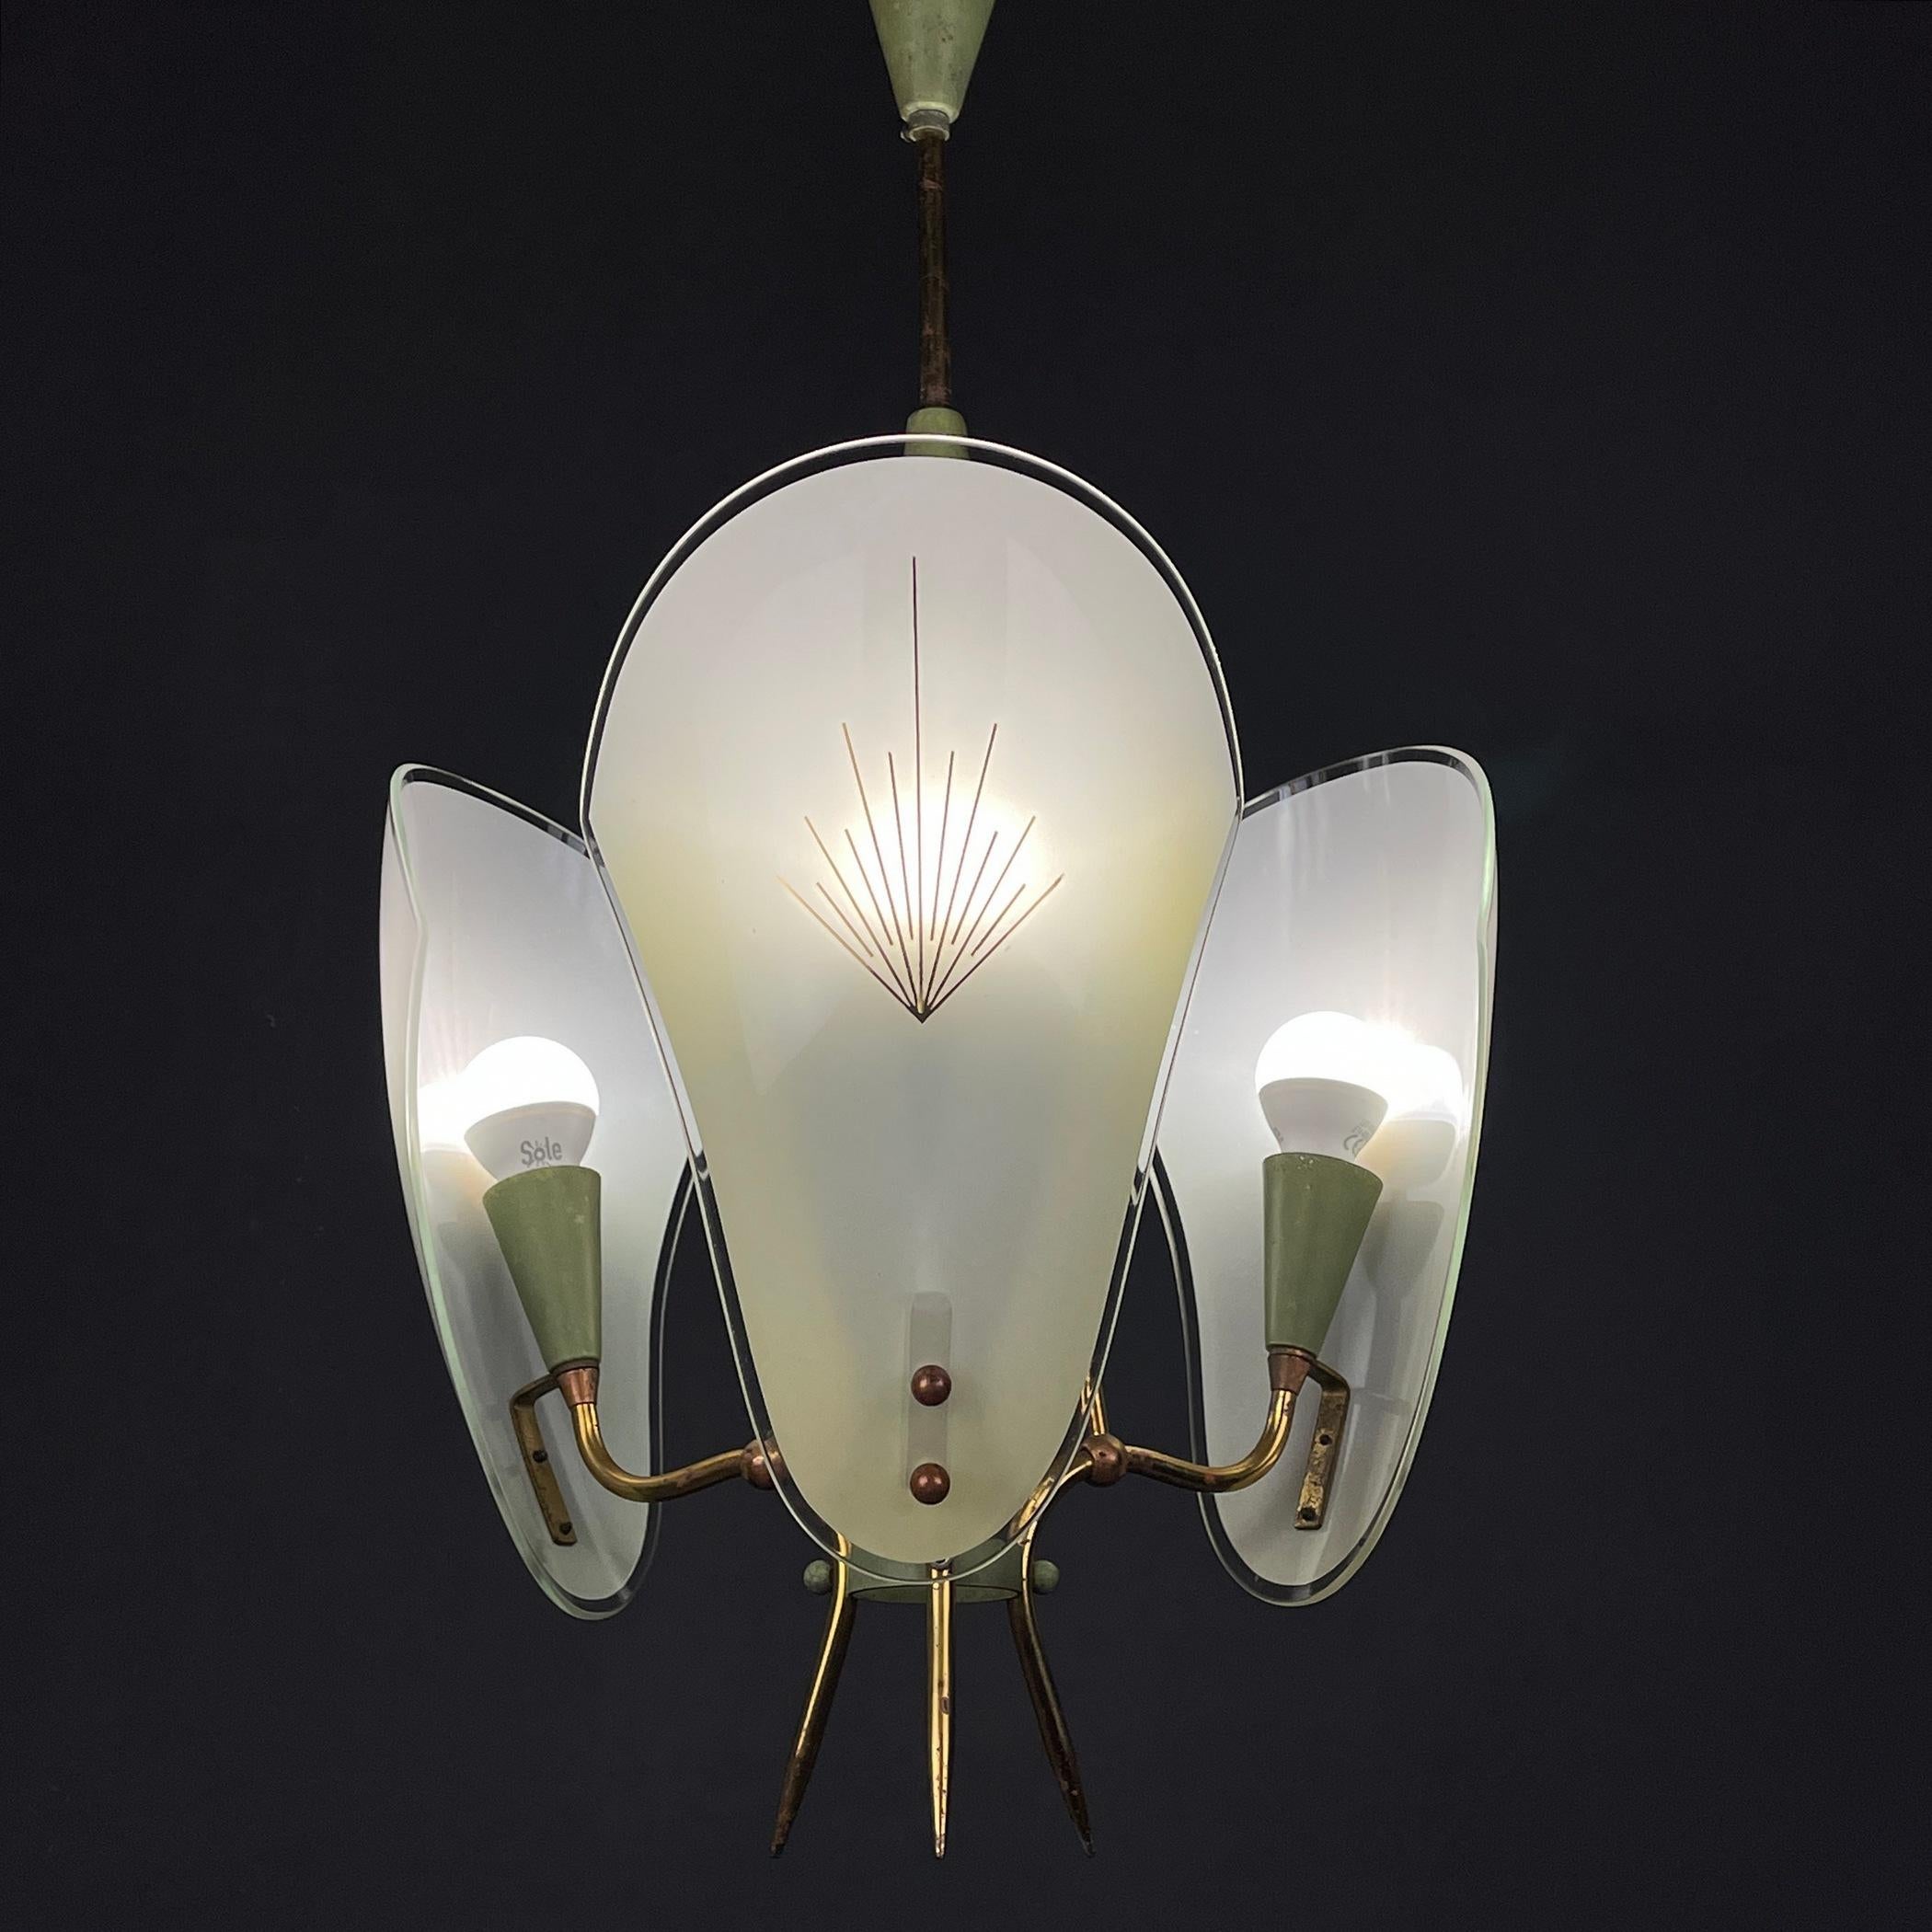 The beautiful 3-arm chandelier made of brass and milky glass, made in Italy in the 50s. If you are looking for a chandelier for a special place, this is the one for you. Great for high ceilings or commercial use in Bars, Cafés, restaurants.